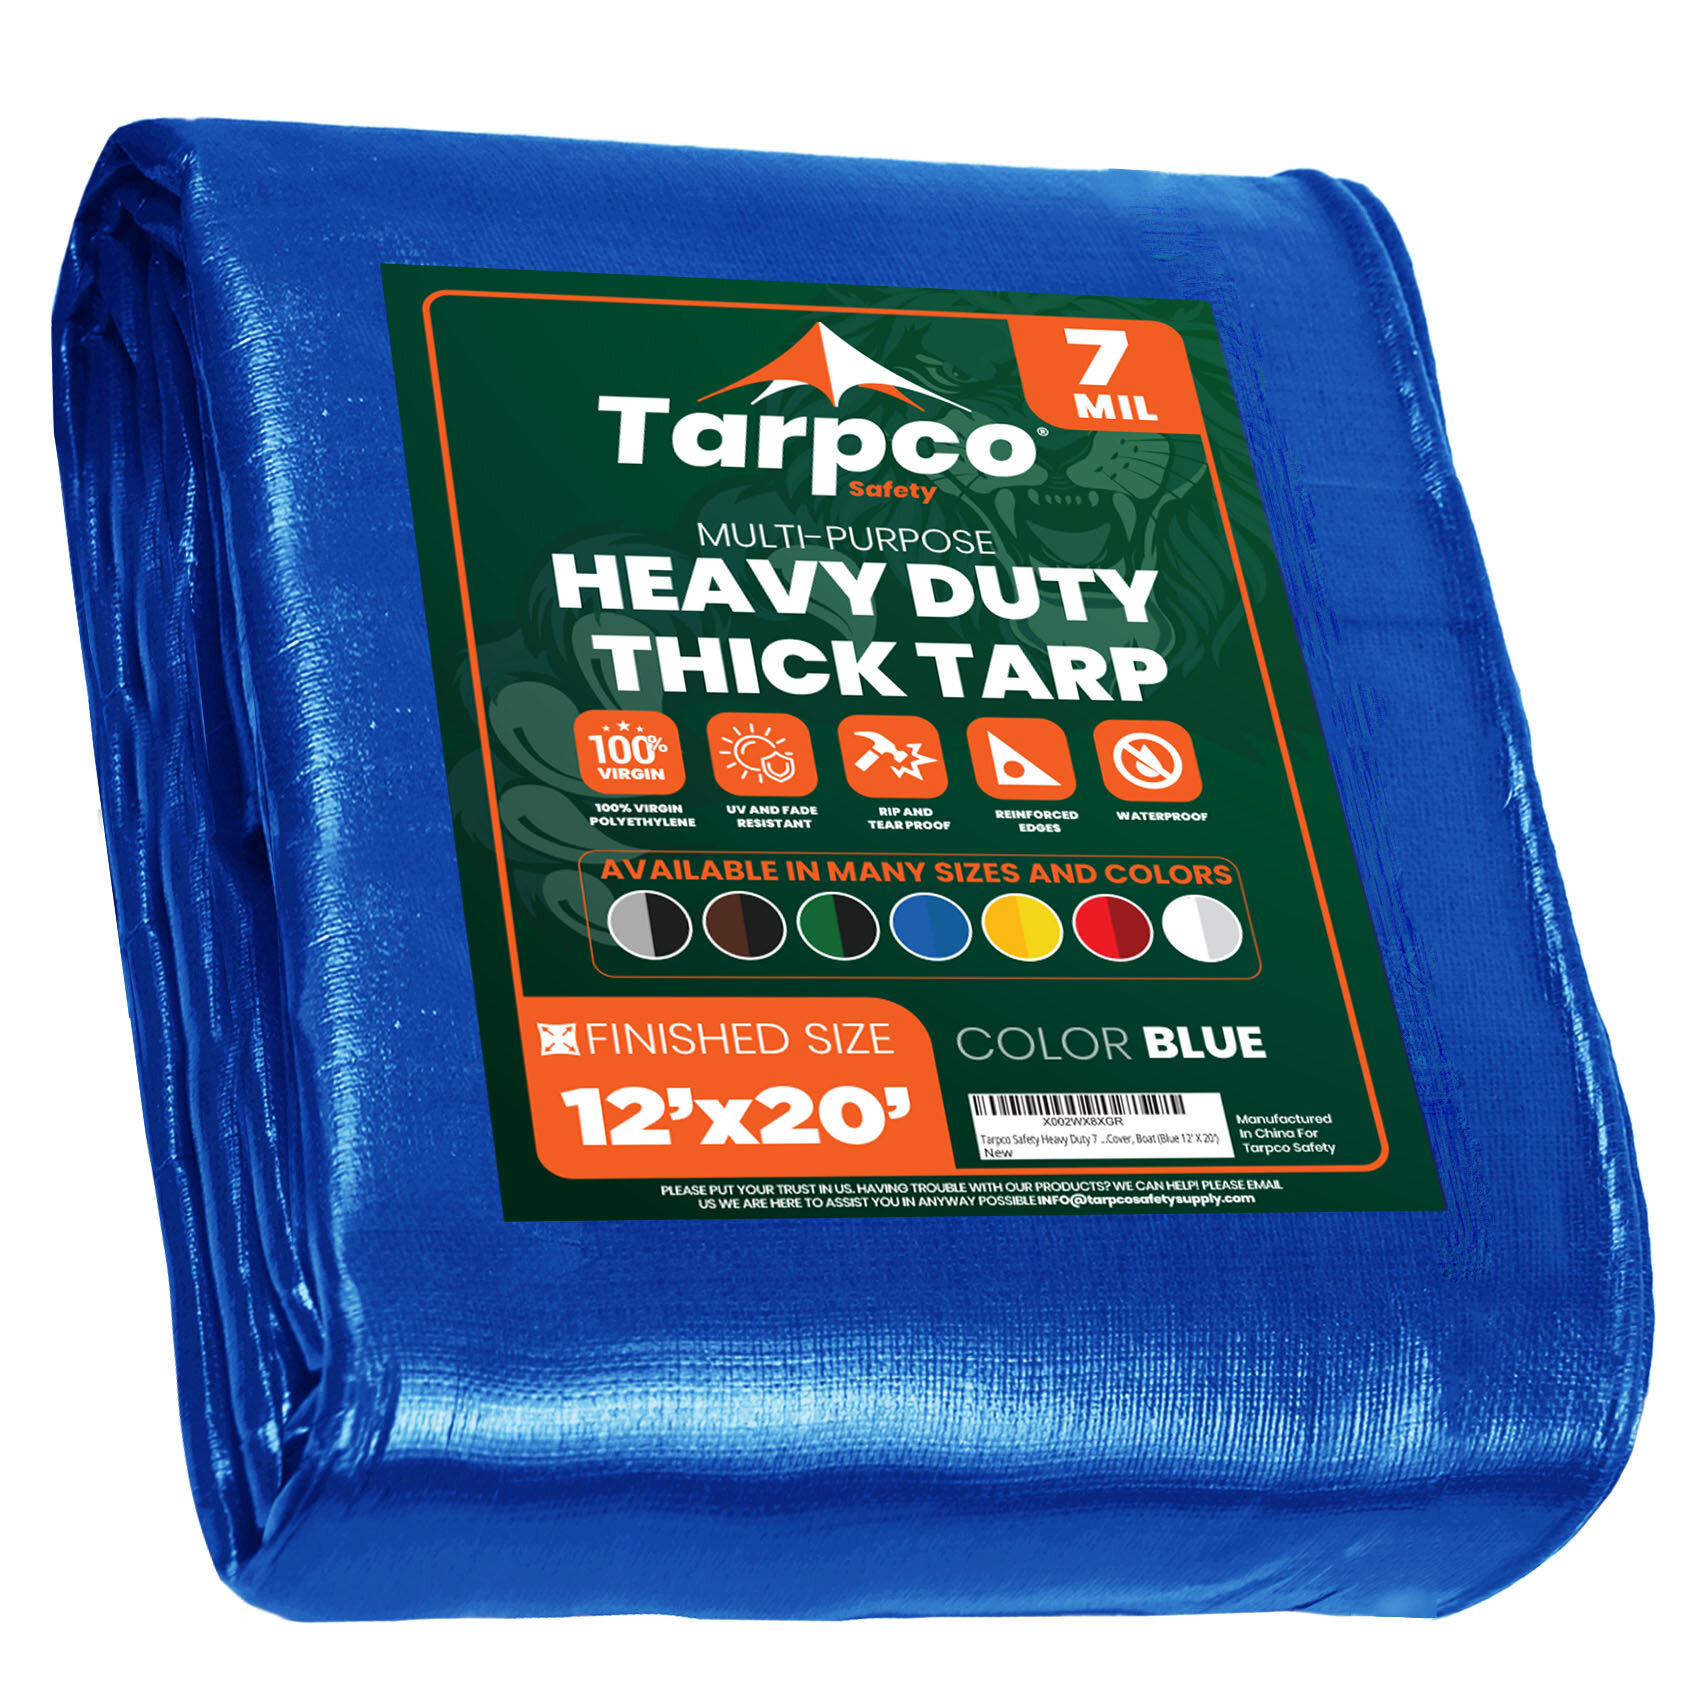 12x20' Reinforced Poly Tarp All Purpose 7mil Canopy Tent Cover Shelter Tarpaulin 